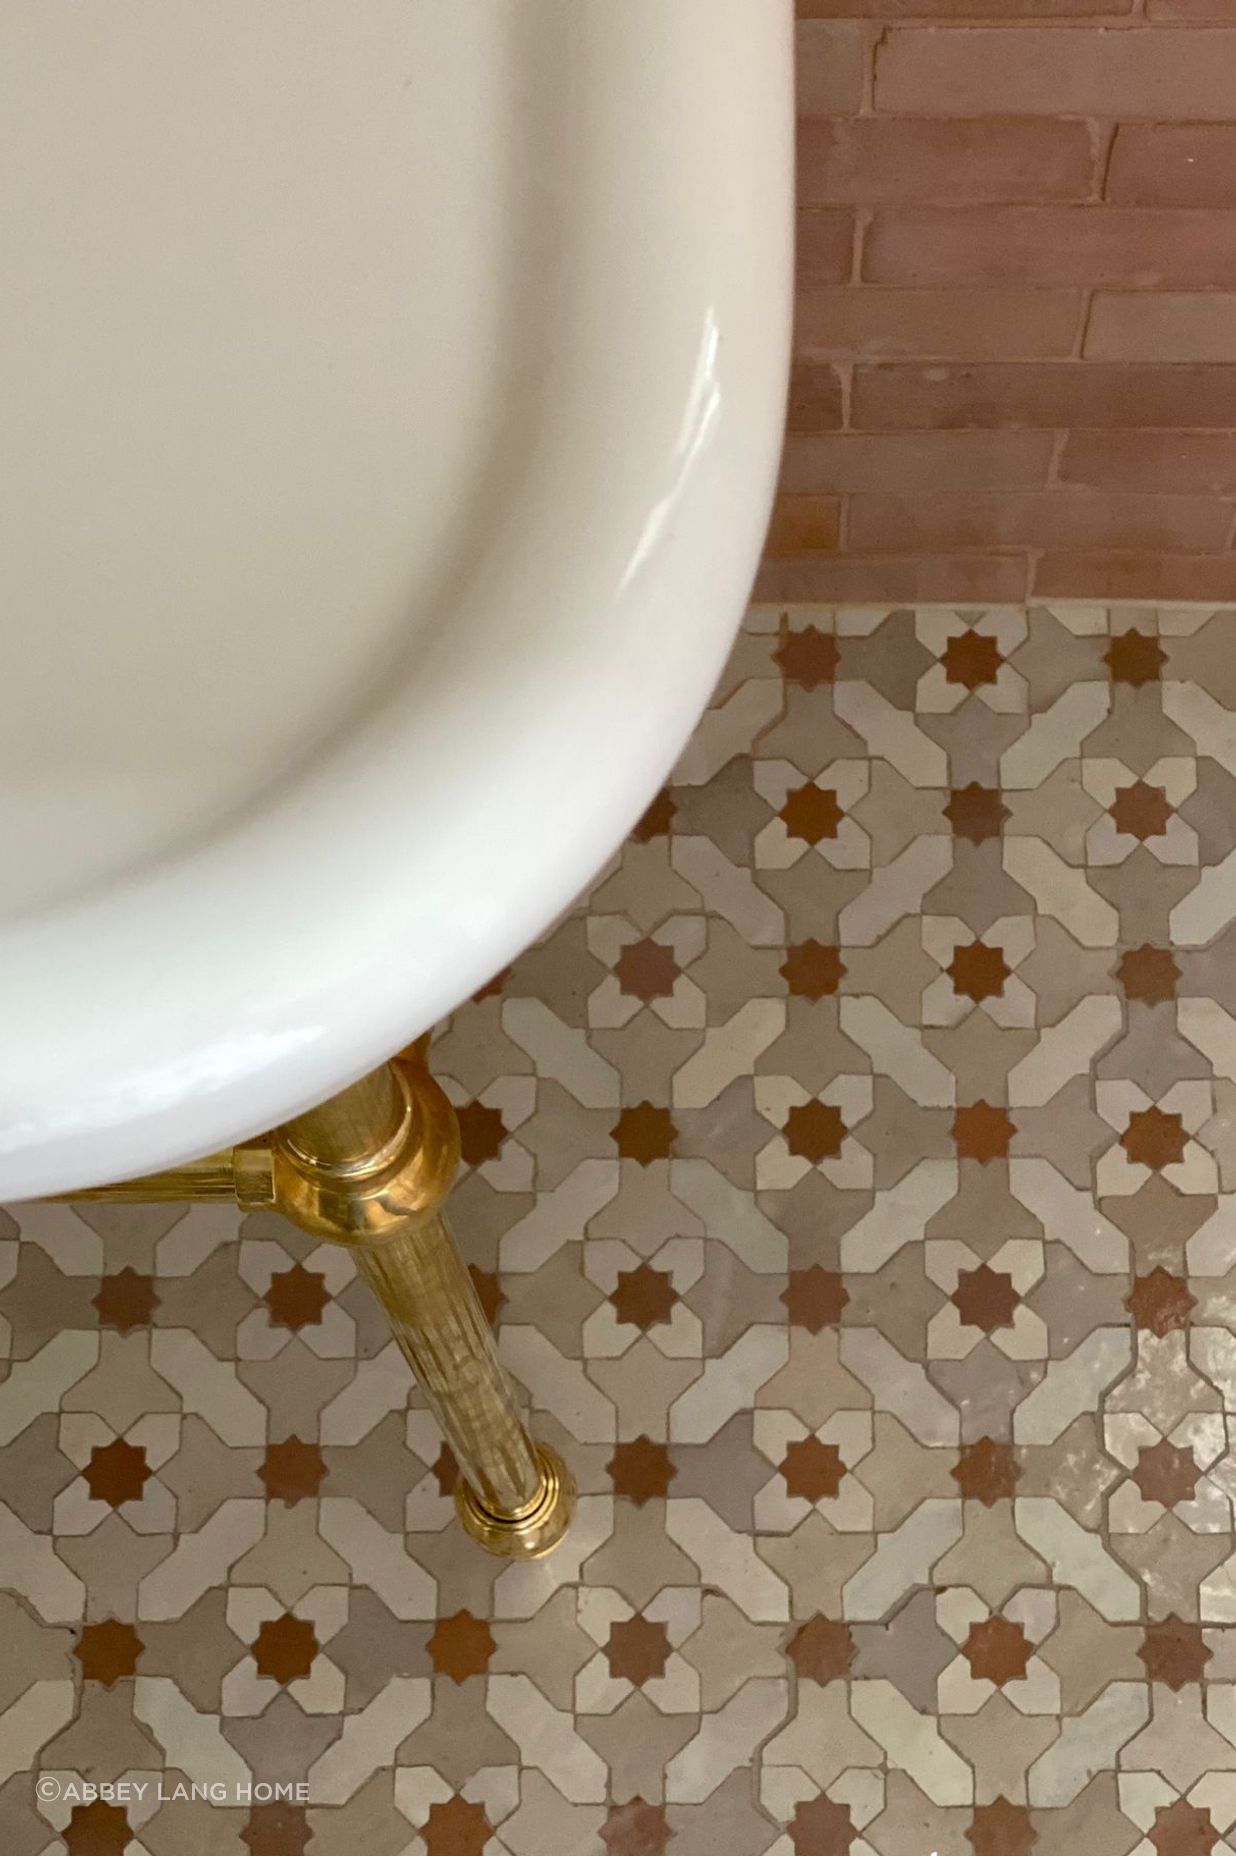  The beautiful patterned Tiles of Ezra collection in this home by Abbey Lang Home